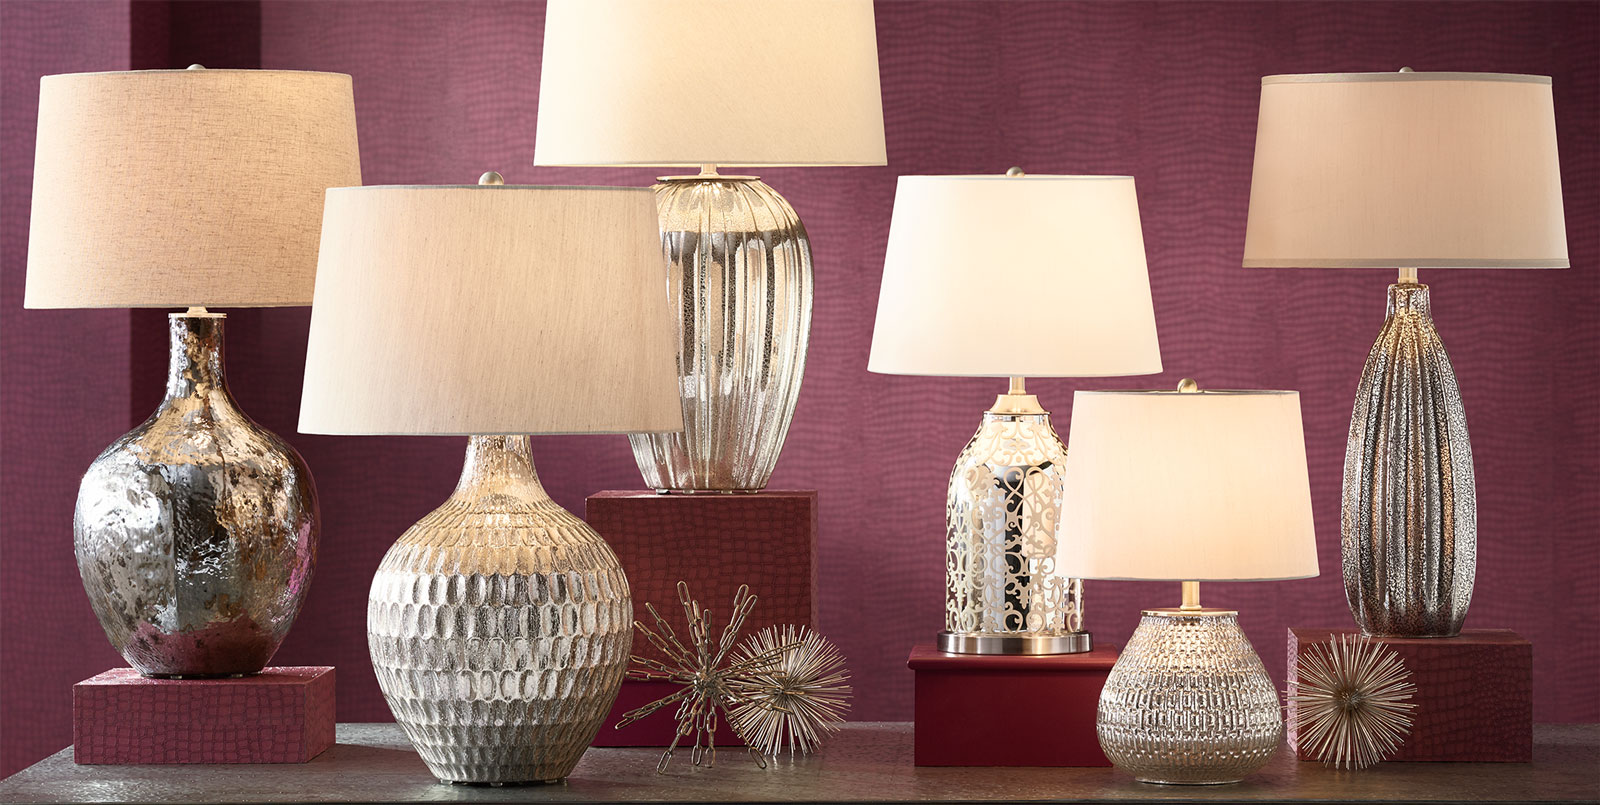 How To Select The Perfect Table Lamp, Table Lamp Height Guide